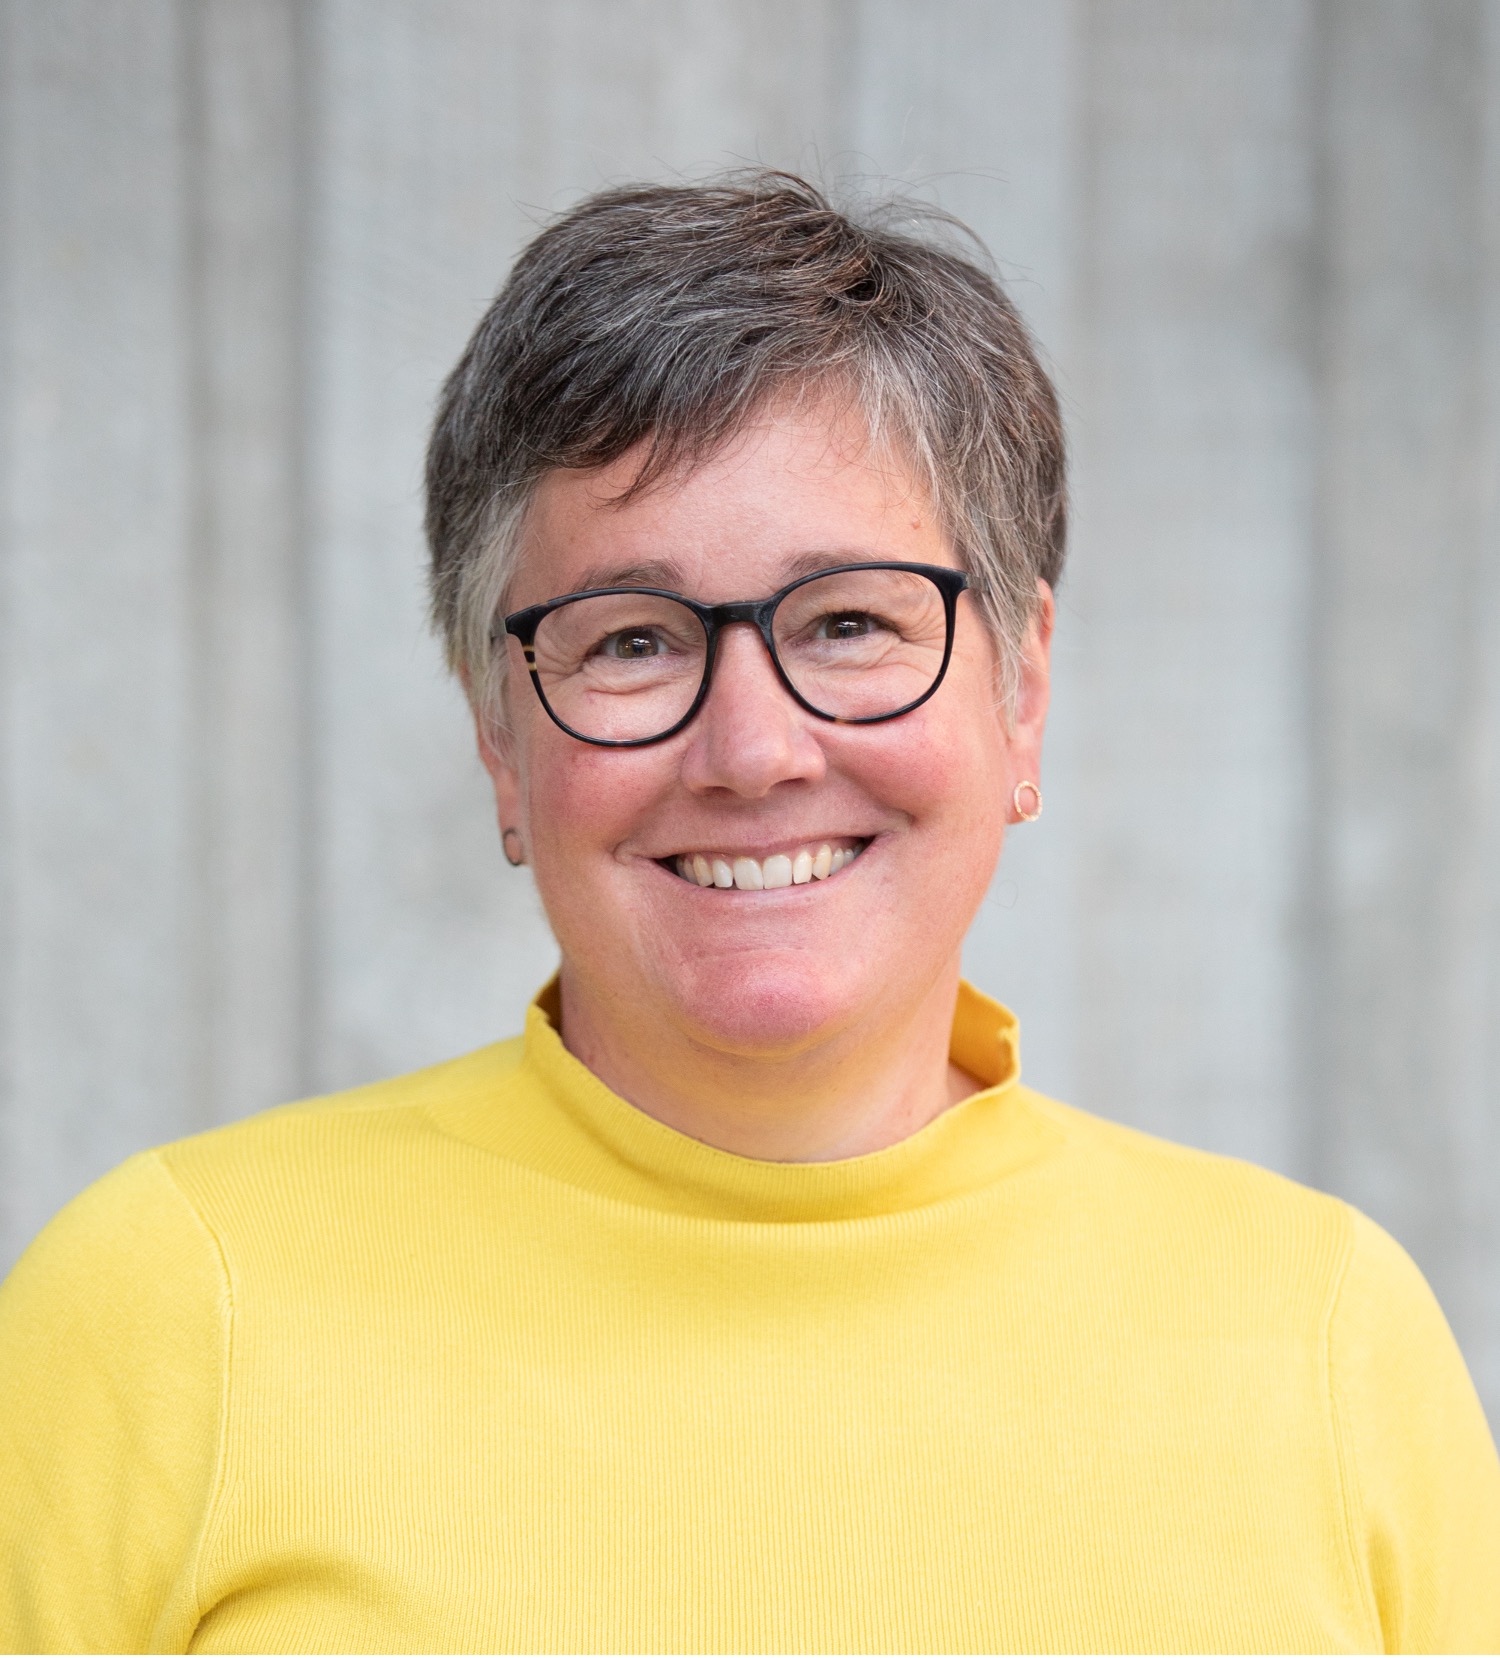 Christina Naula - This photograph shows a headshot of Christina, a pale skinned woman with grey short hair, glasses and a bit smile. She is wearing a yellow jumper